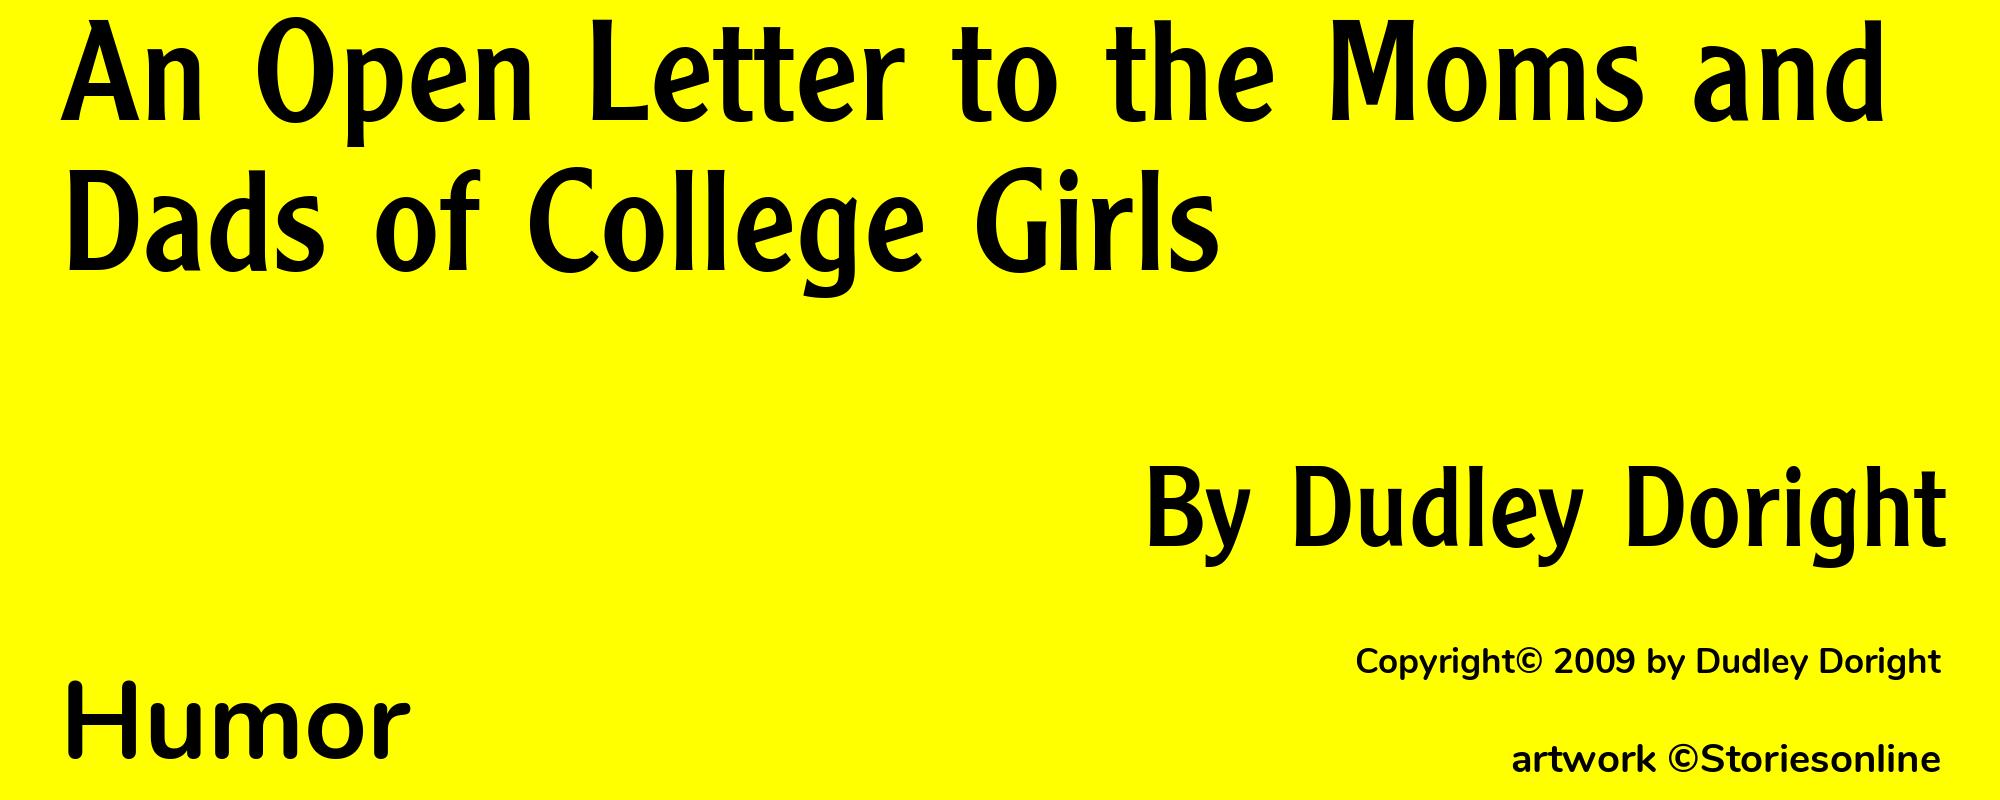 An Open Letter to the Moms and Dads of College Girls - Cover